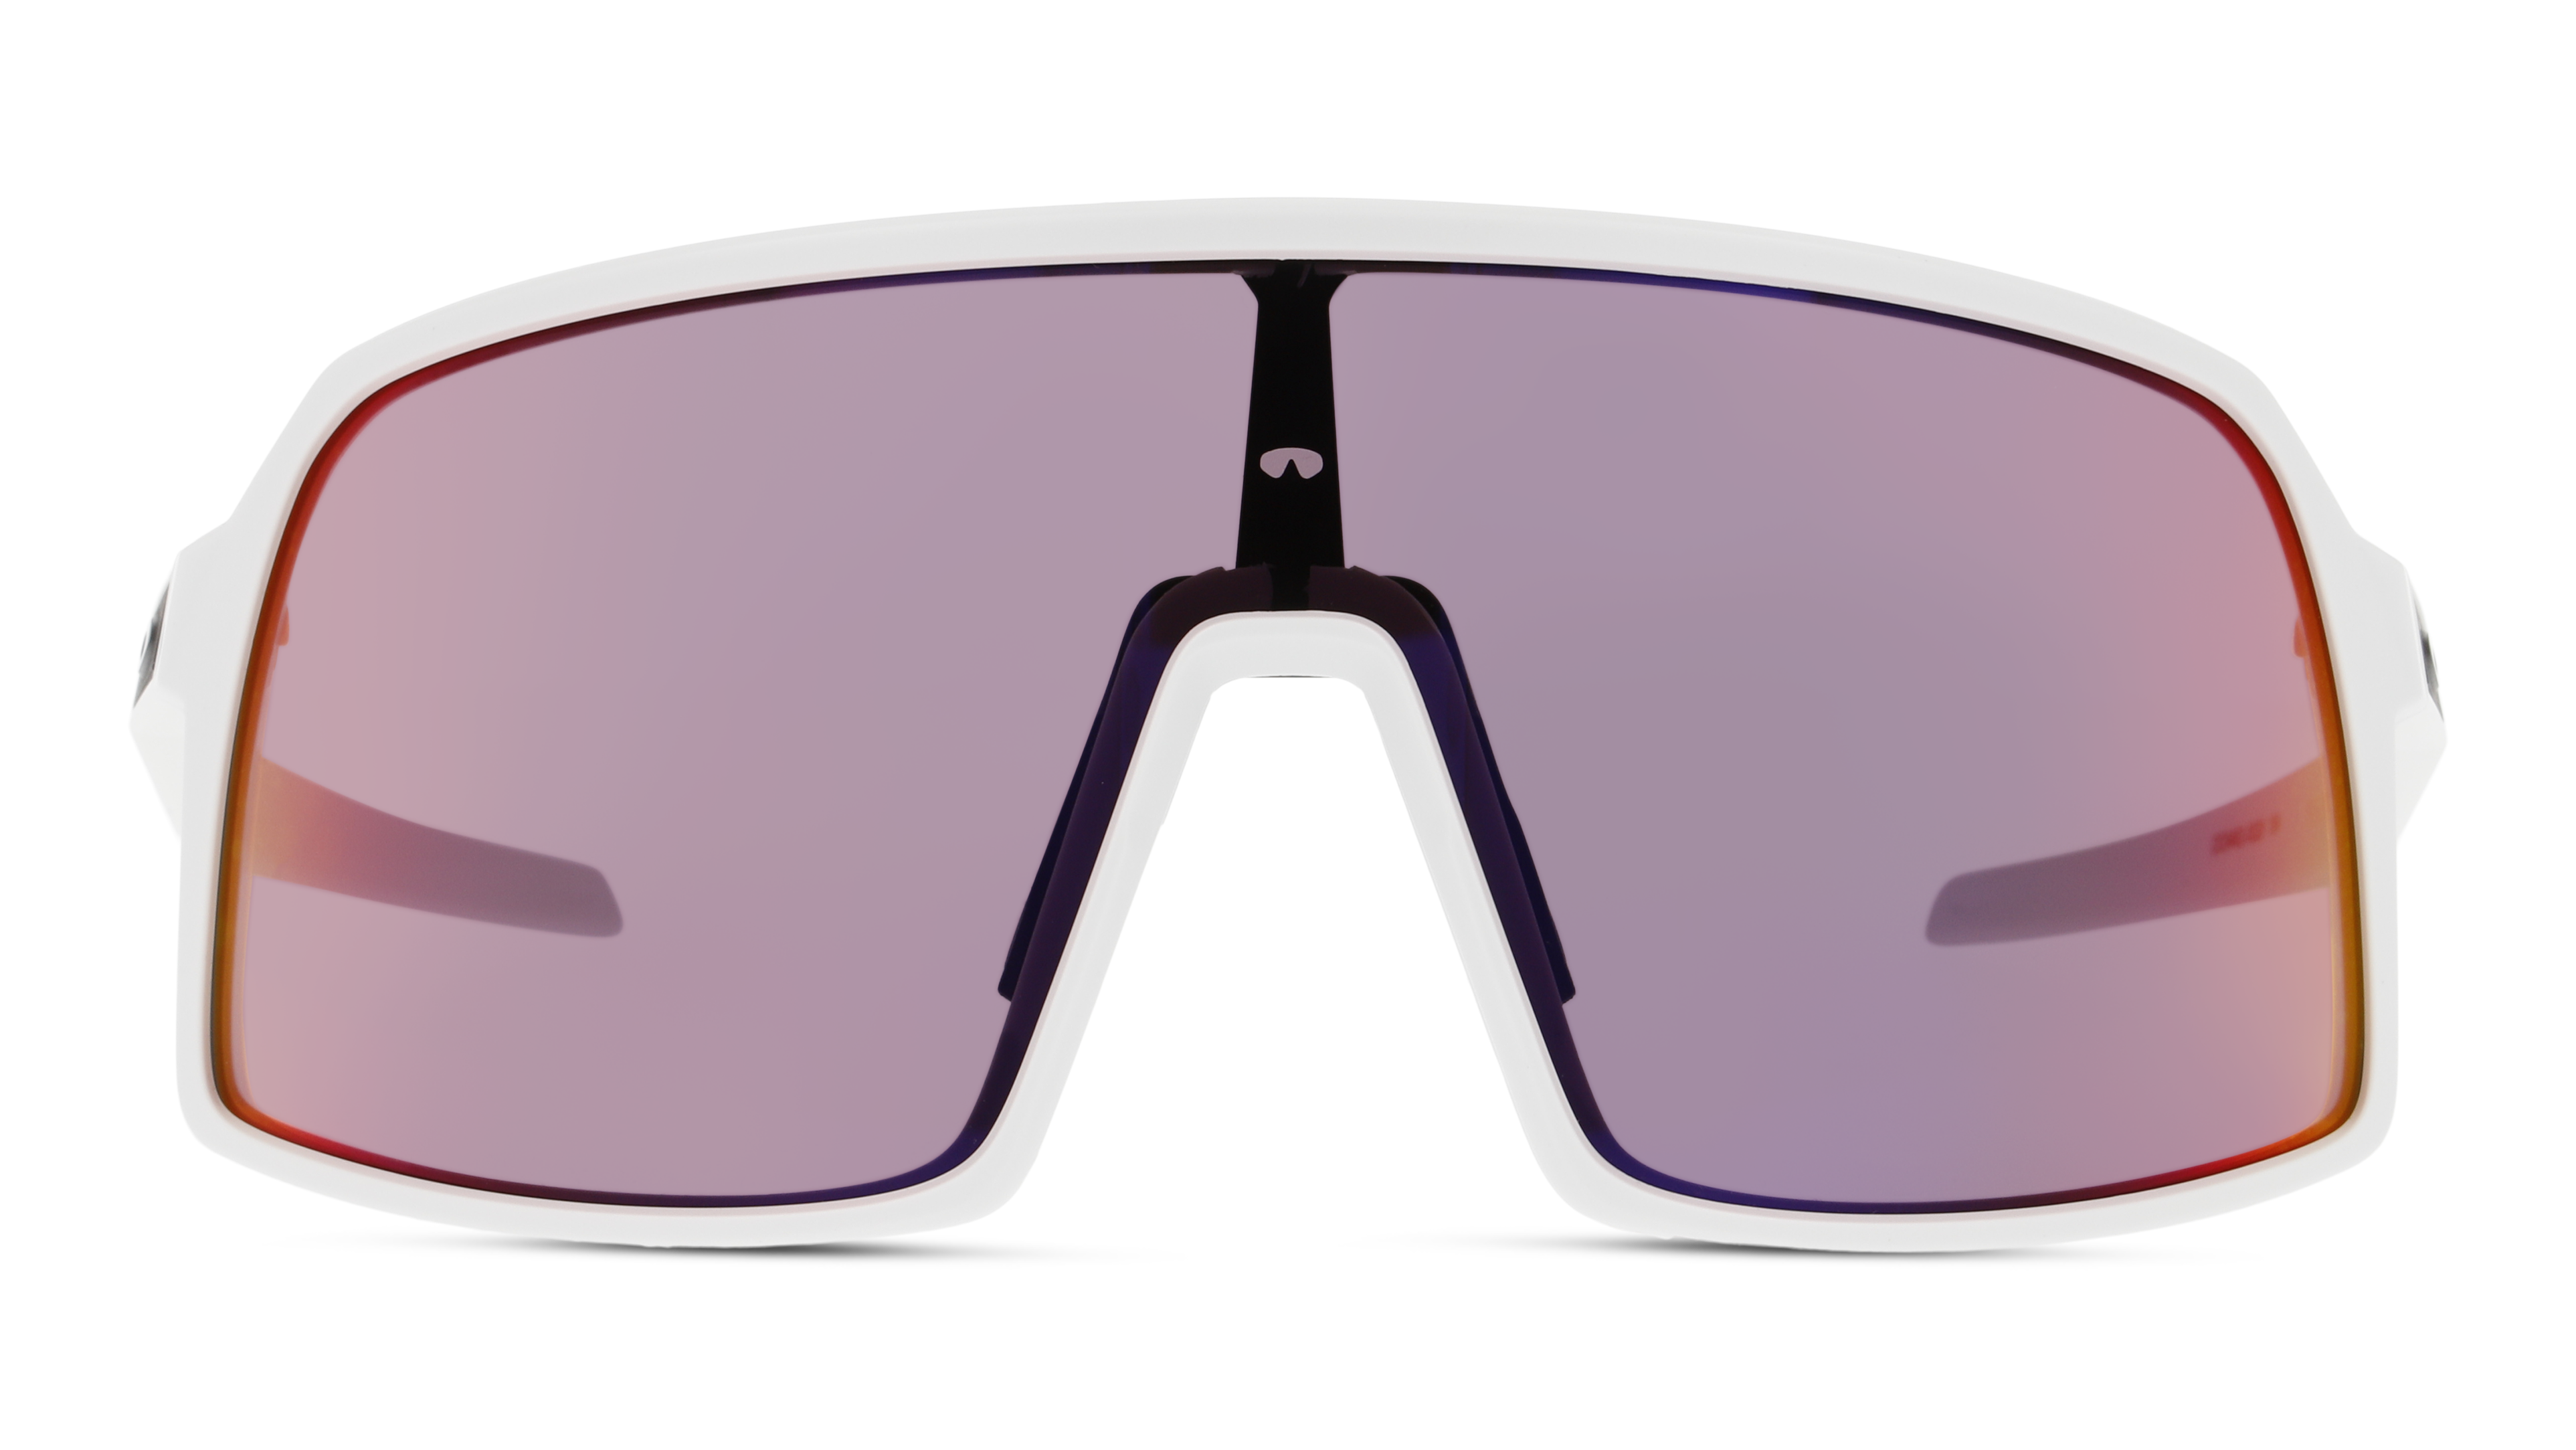 [products.image.front] Oakley Sutro S OO9462 946205